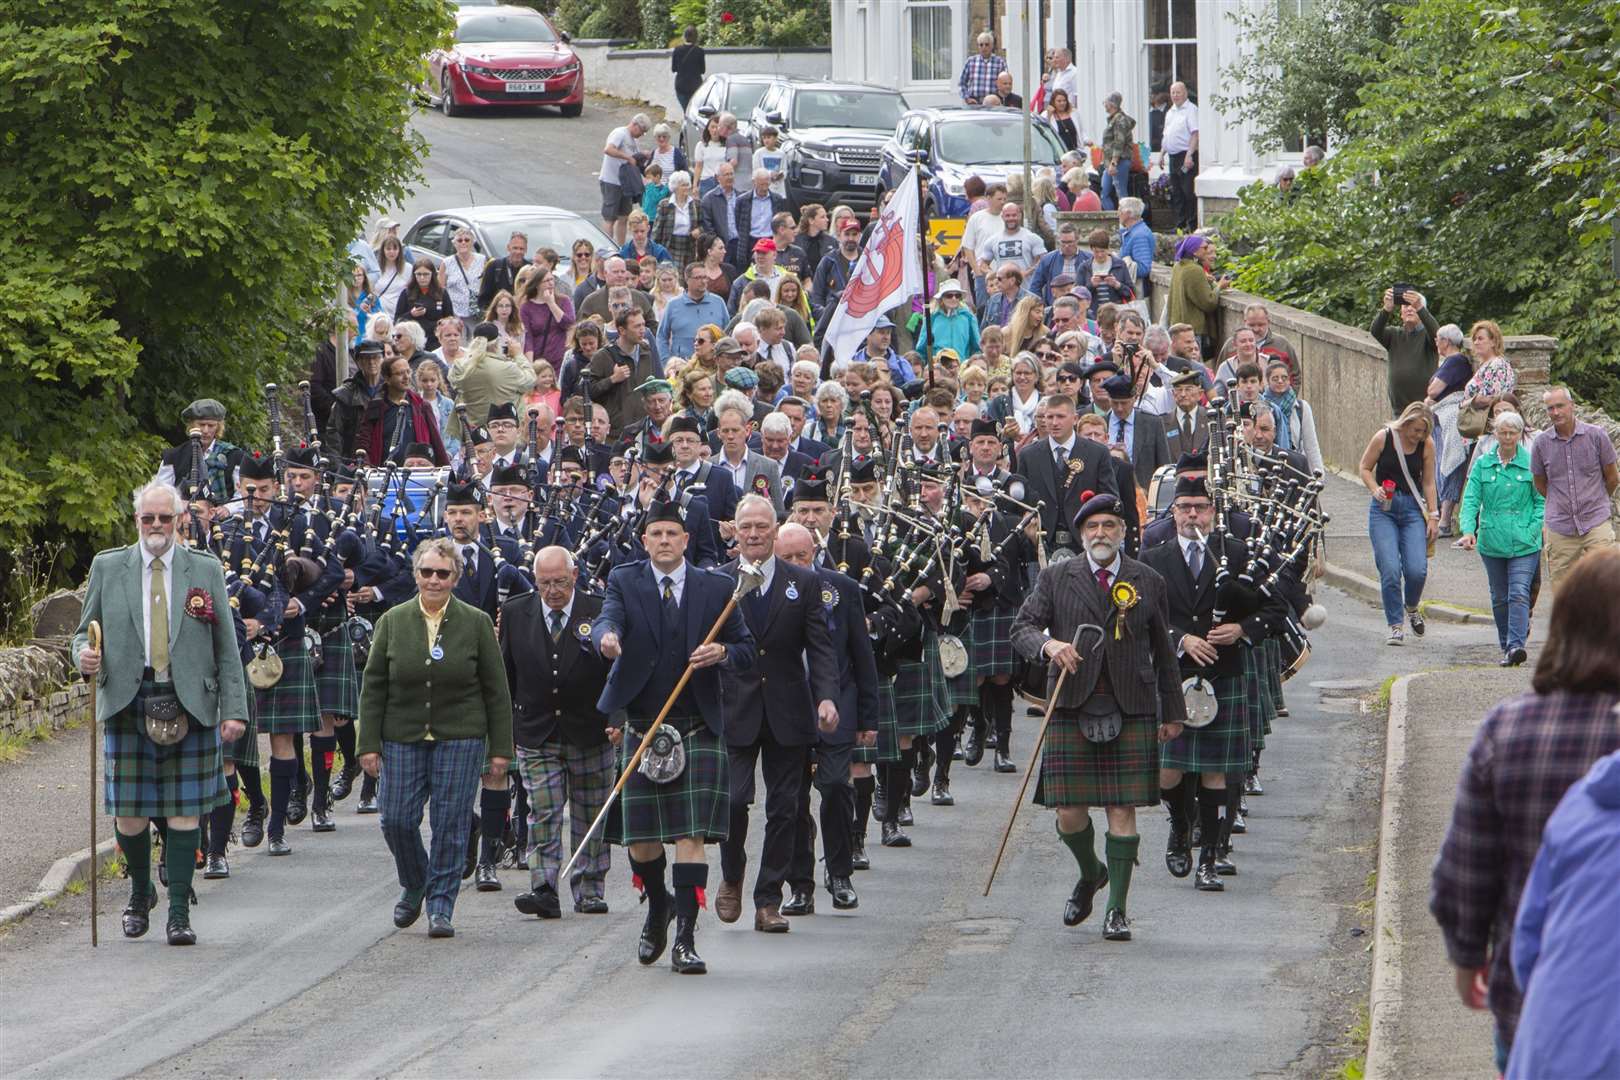 The 2022 Halkirk Highland Games – the first since 2019 – got under way with the traditional march from the centre of the village to the games field, led by Thurso and District Pipe Band and Wick RBLS Pipe Band along with games chieftain Viscount Thurso (front, right) and Halkirk Highland Games Association president Alistair Swanson (front, left). Picture: Robert MacDonald / Northern Studios